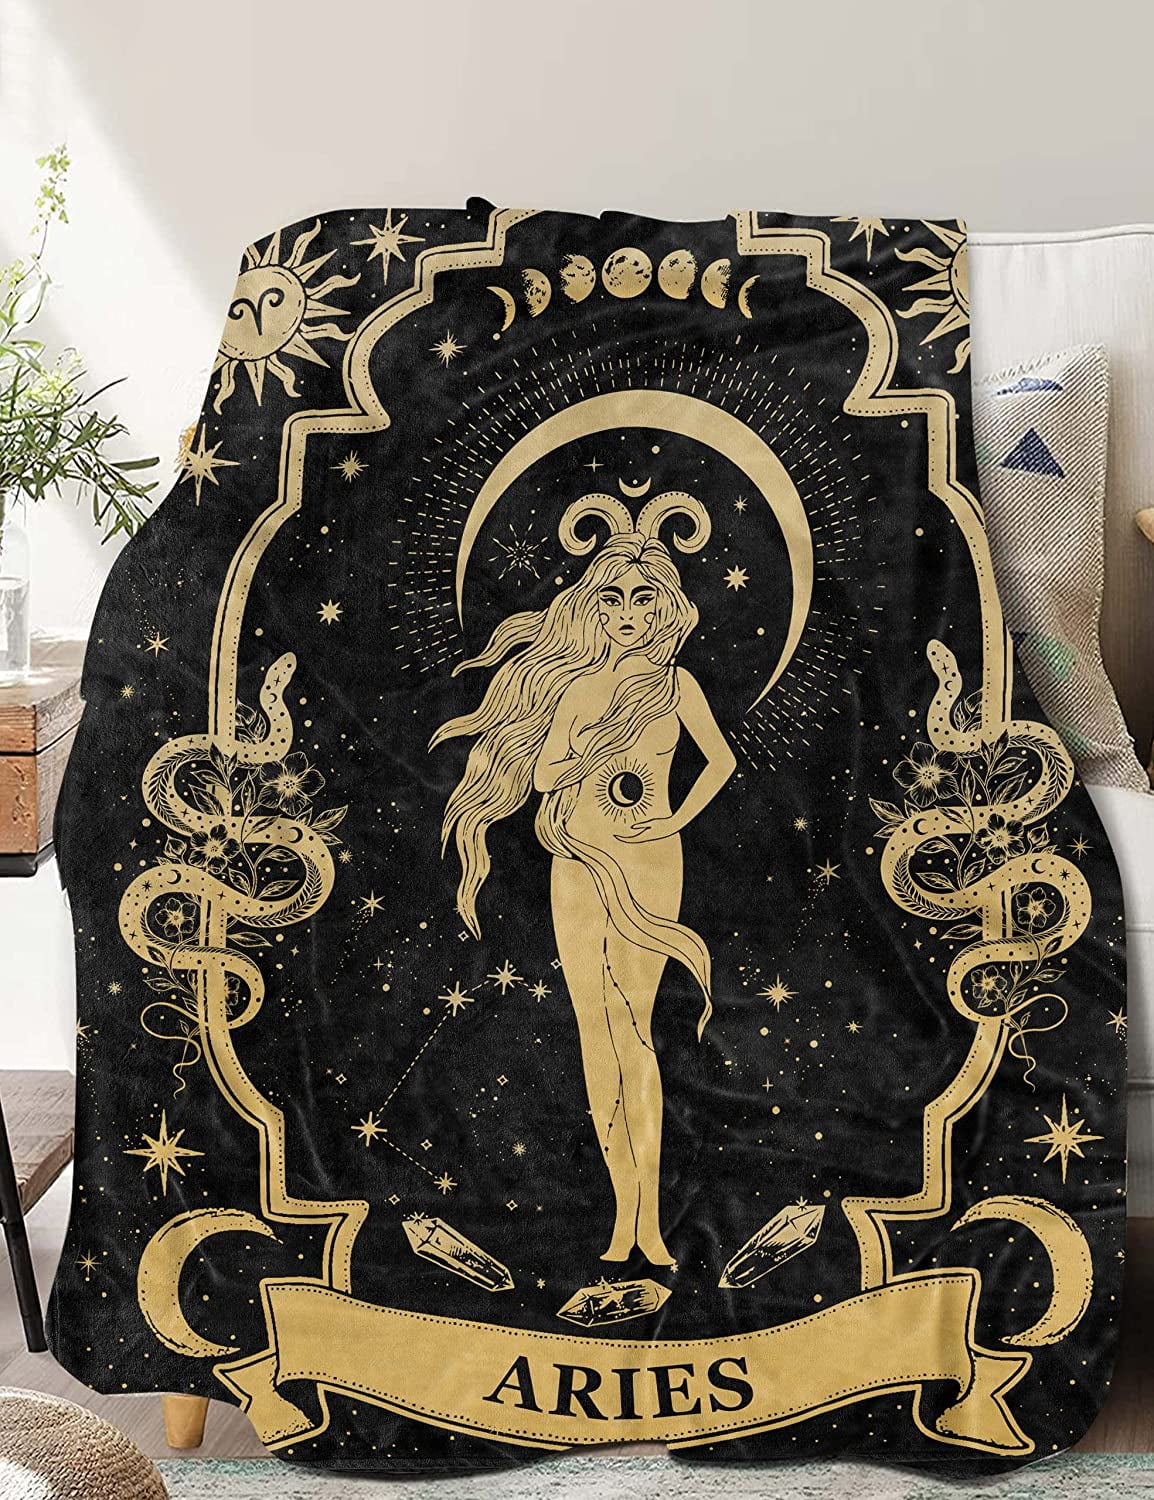 Aries Gifts for Women, Aries Zodiac Blanket 60X50, Witchy Gifts,Aries Gothic  Gifts Aries Astrology Decor Tarot Moon Constellation Soft Throw Blanket 